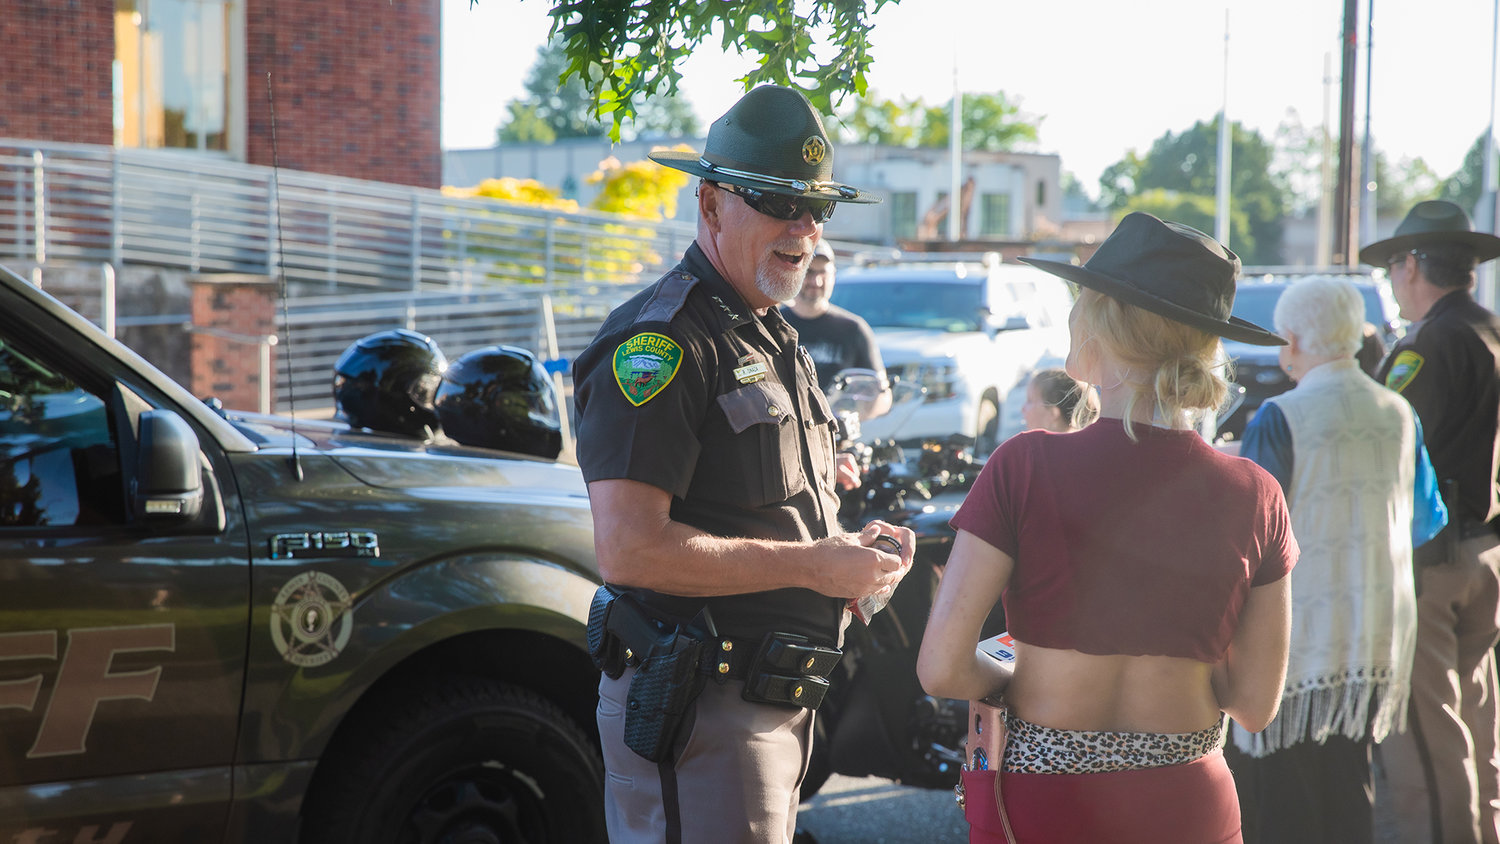 Sheriff Rob Snaza, with the Lewis County Sheriff’s Office, smiles while greeting attendees of a National Night Out event hosted Tuesday night at George Washington Park in Centralia.